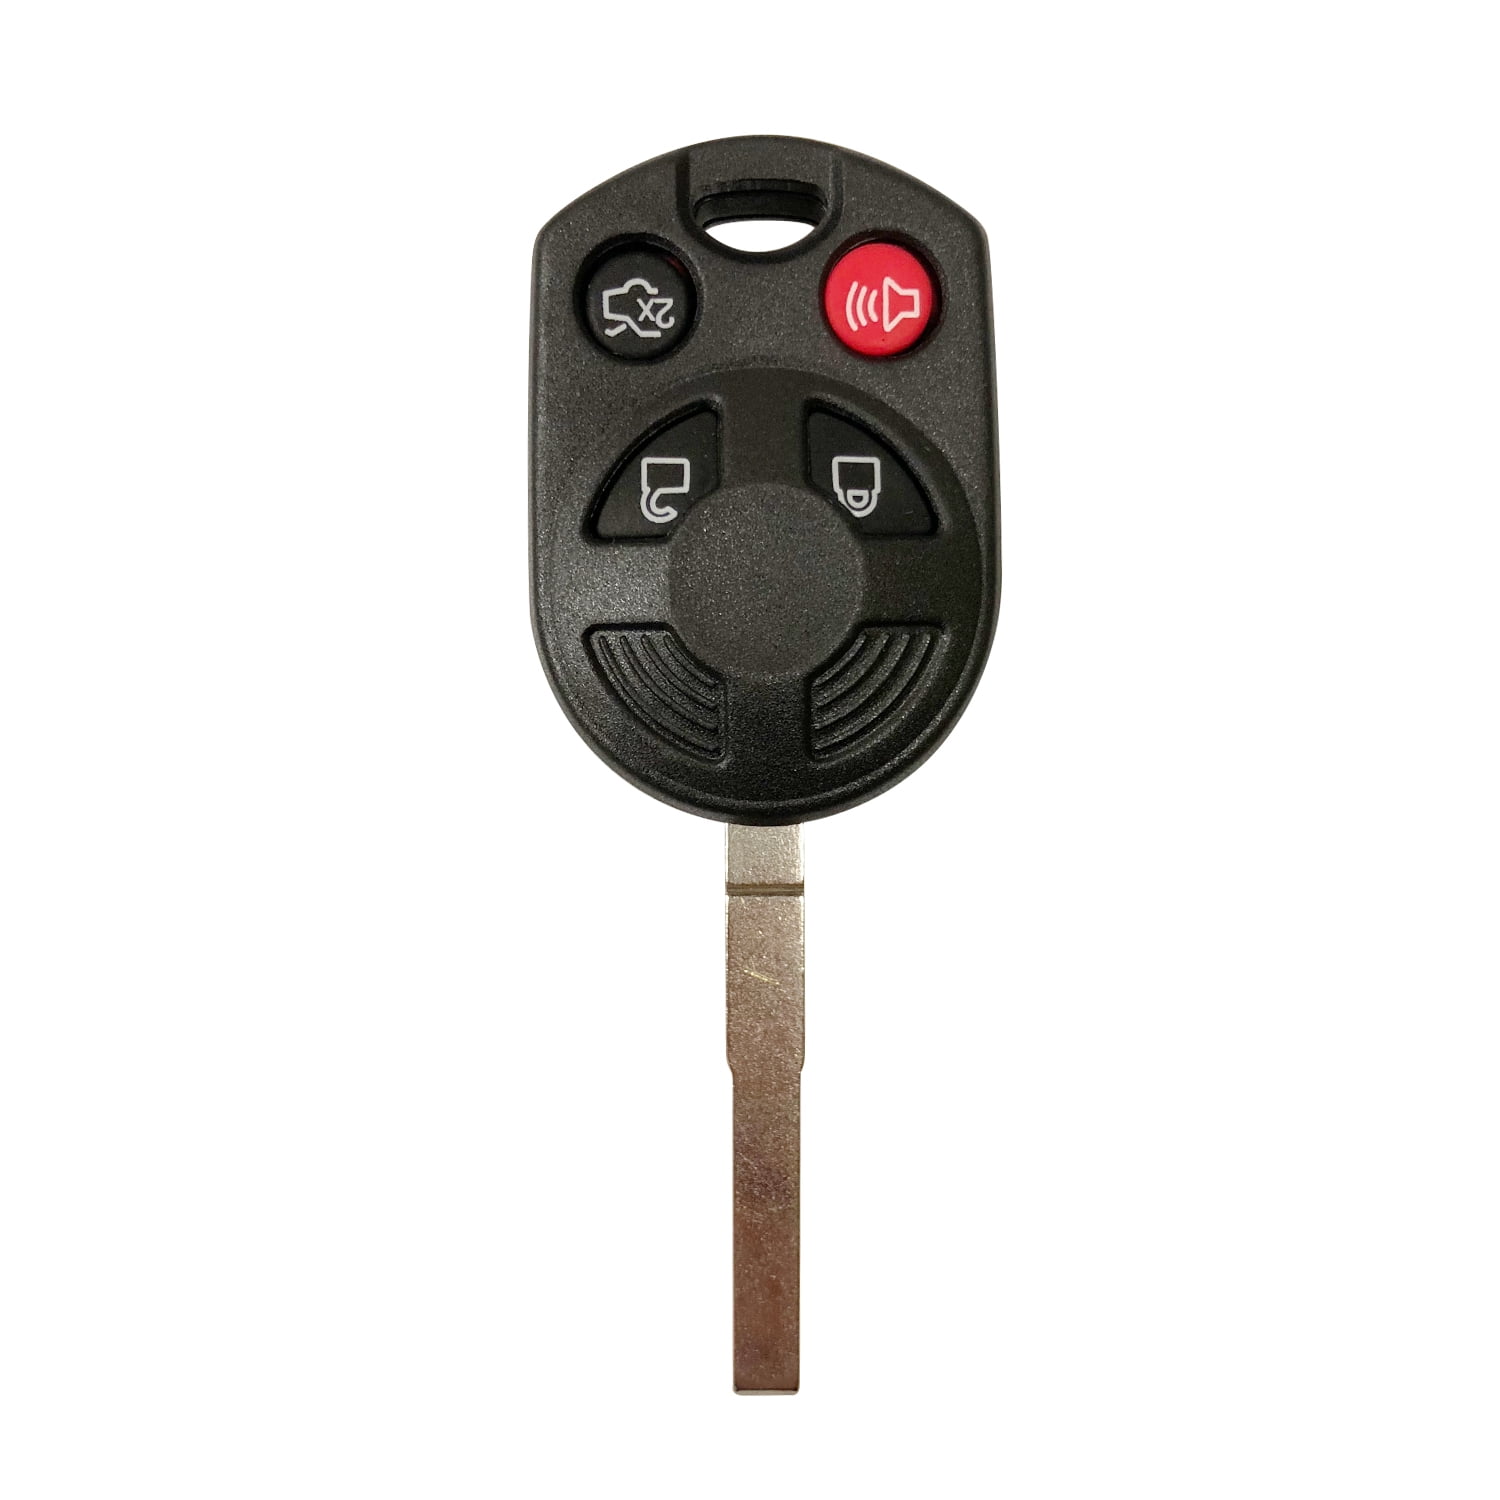 The Clamps for Ford Focus Key Focus HU101 Key Fixture 